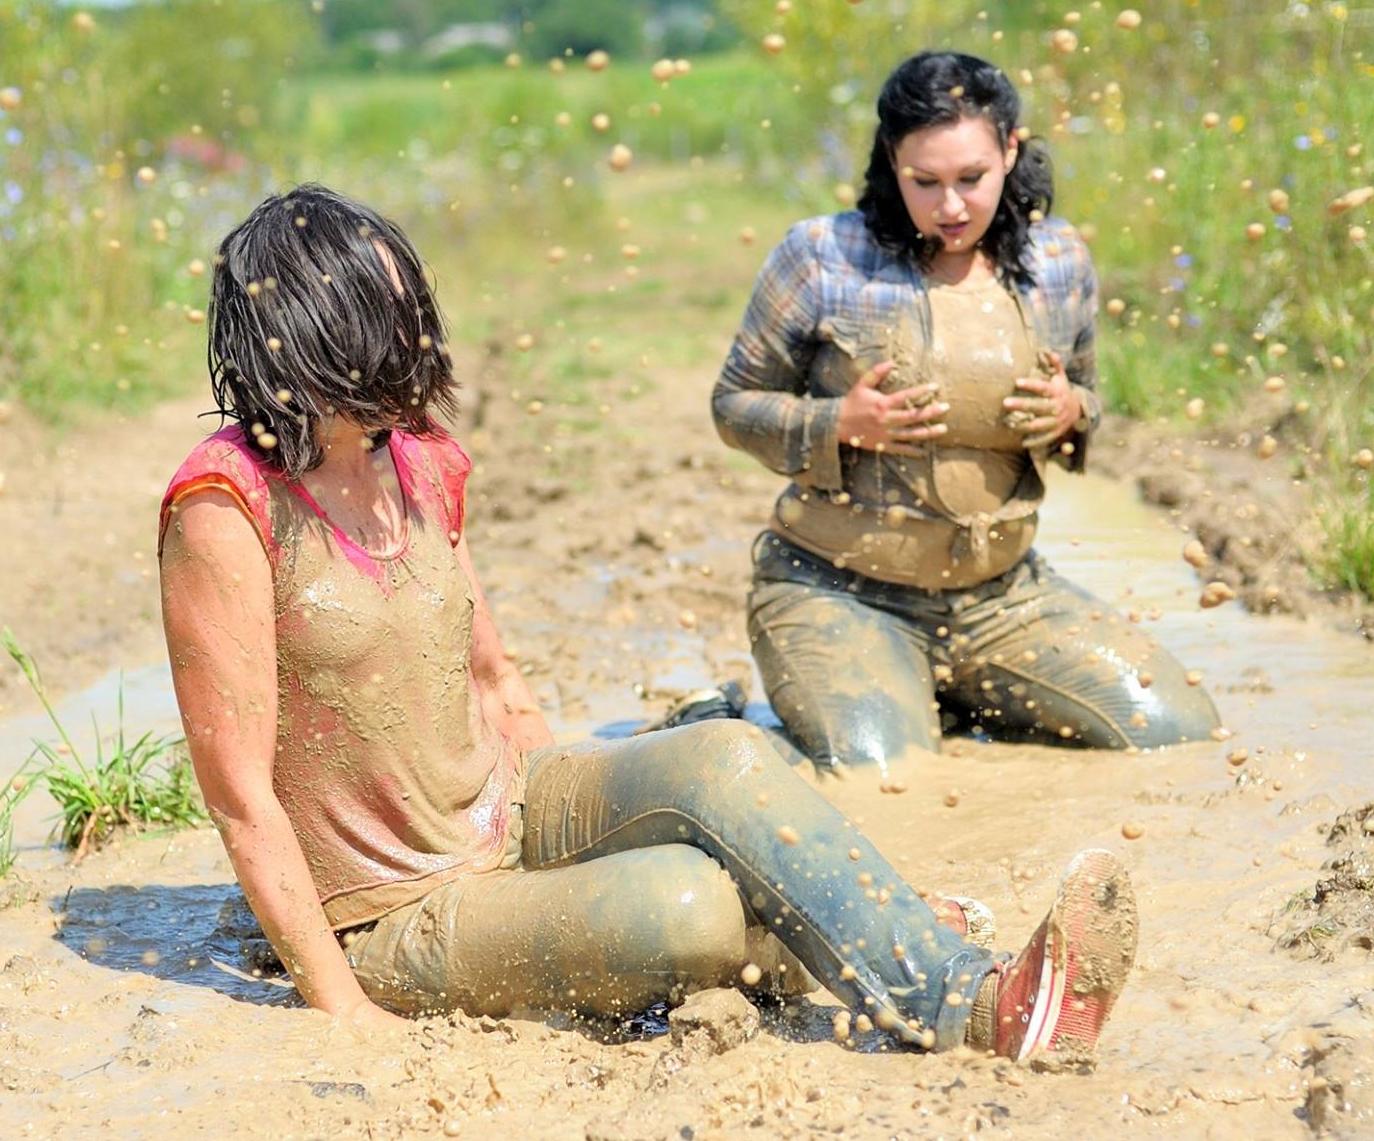 Two Brunette Messy Girls wearing Muddy Blue Denim Jeans and Muddy Shirts